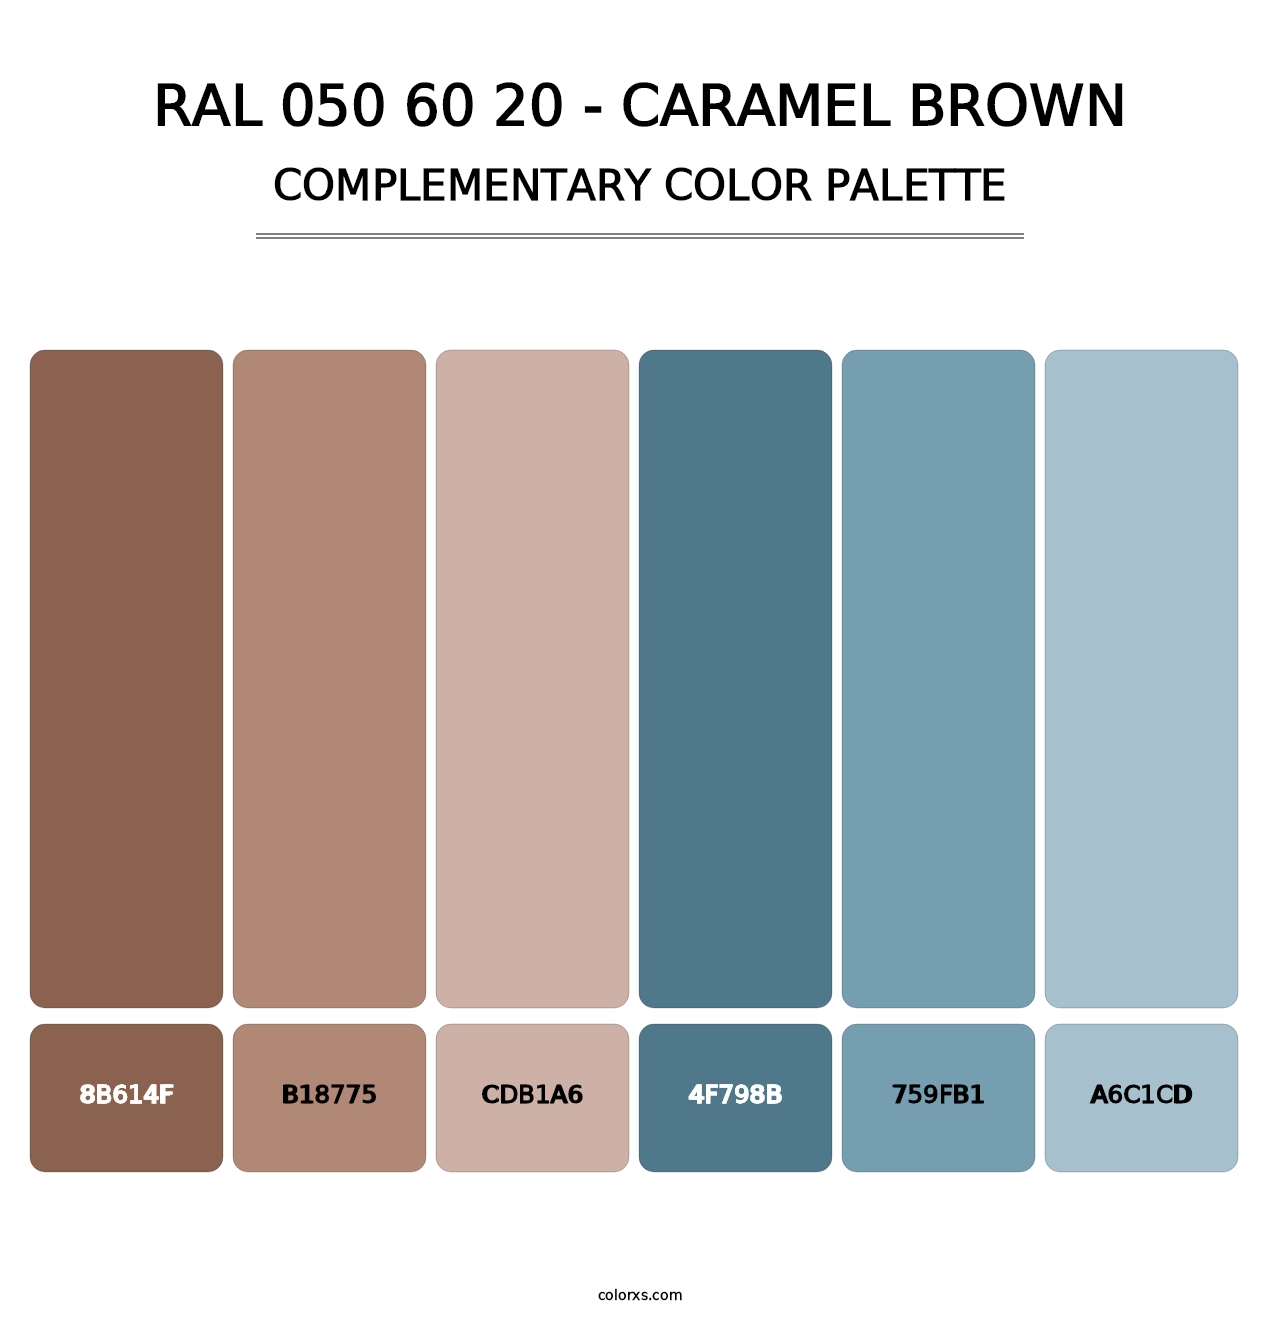 RAL 050 60 20 - Caramel Brown - Complementary Color Palette